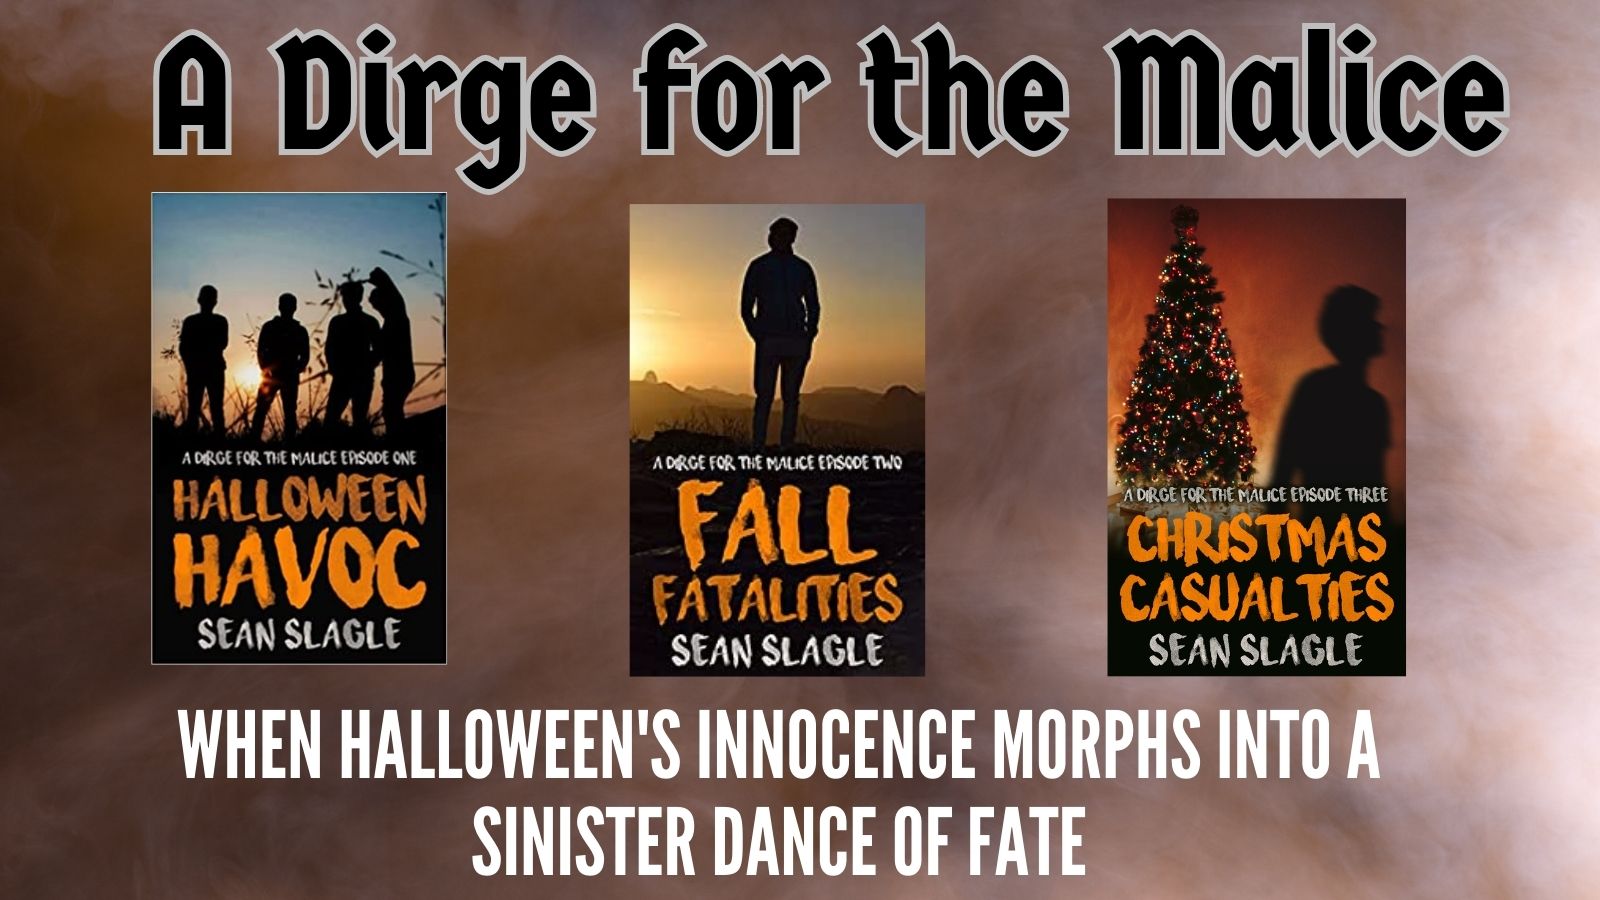 A Dirge for the Malice by Sean Slagle